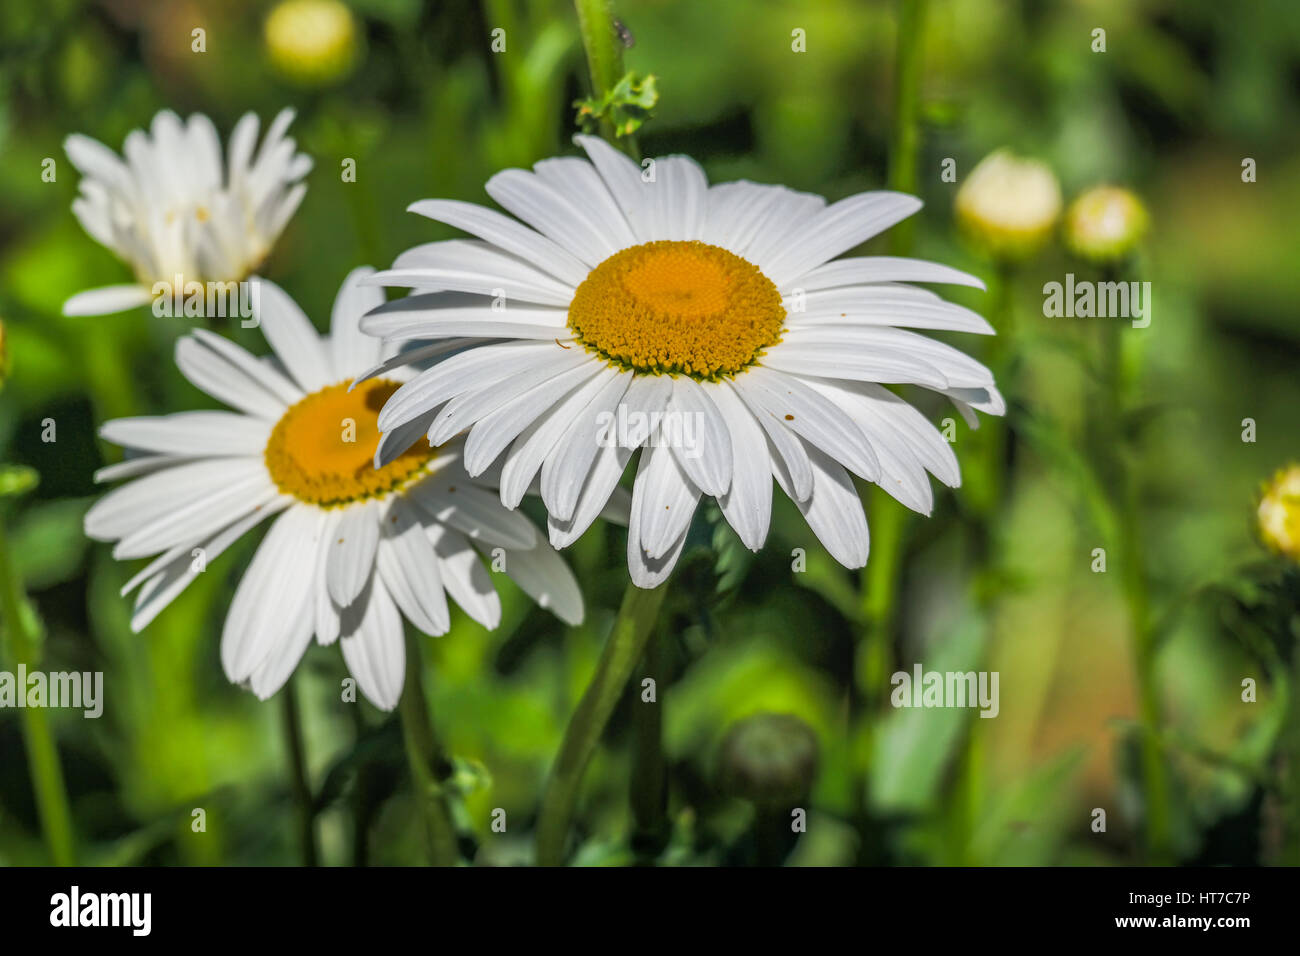 white daissies yellow sun like center perfectly designed petals Stock Photo